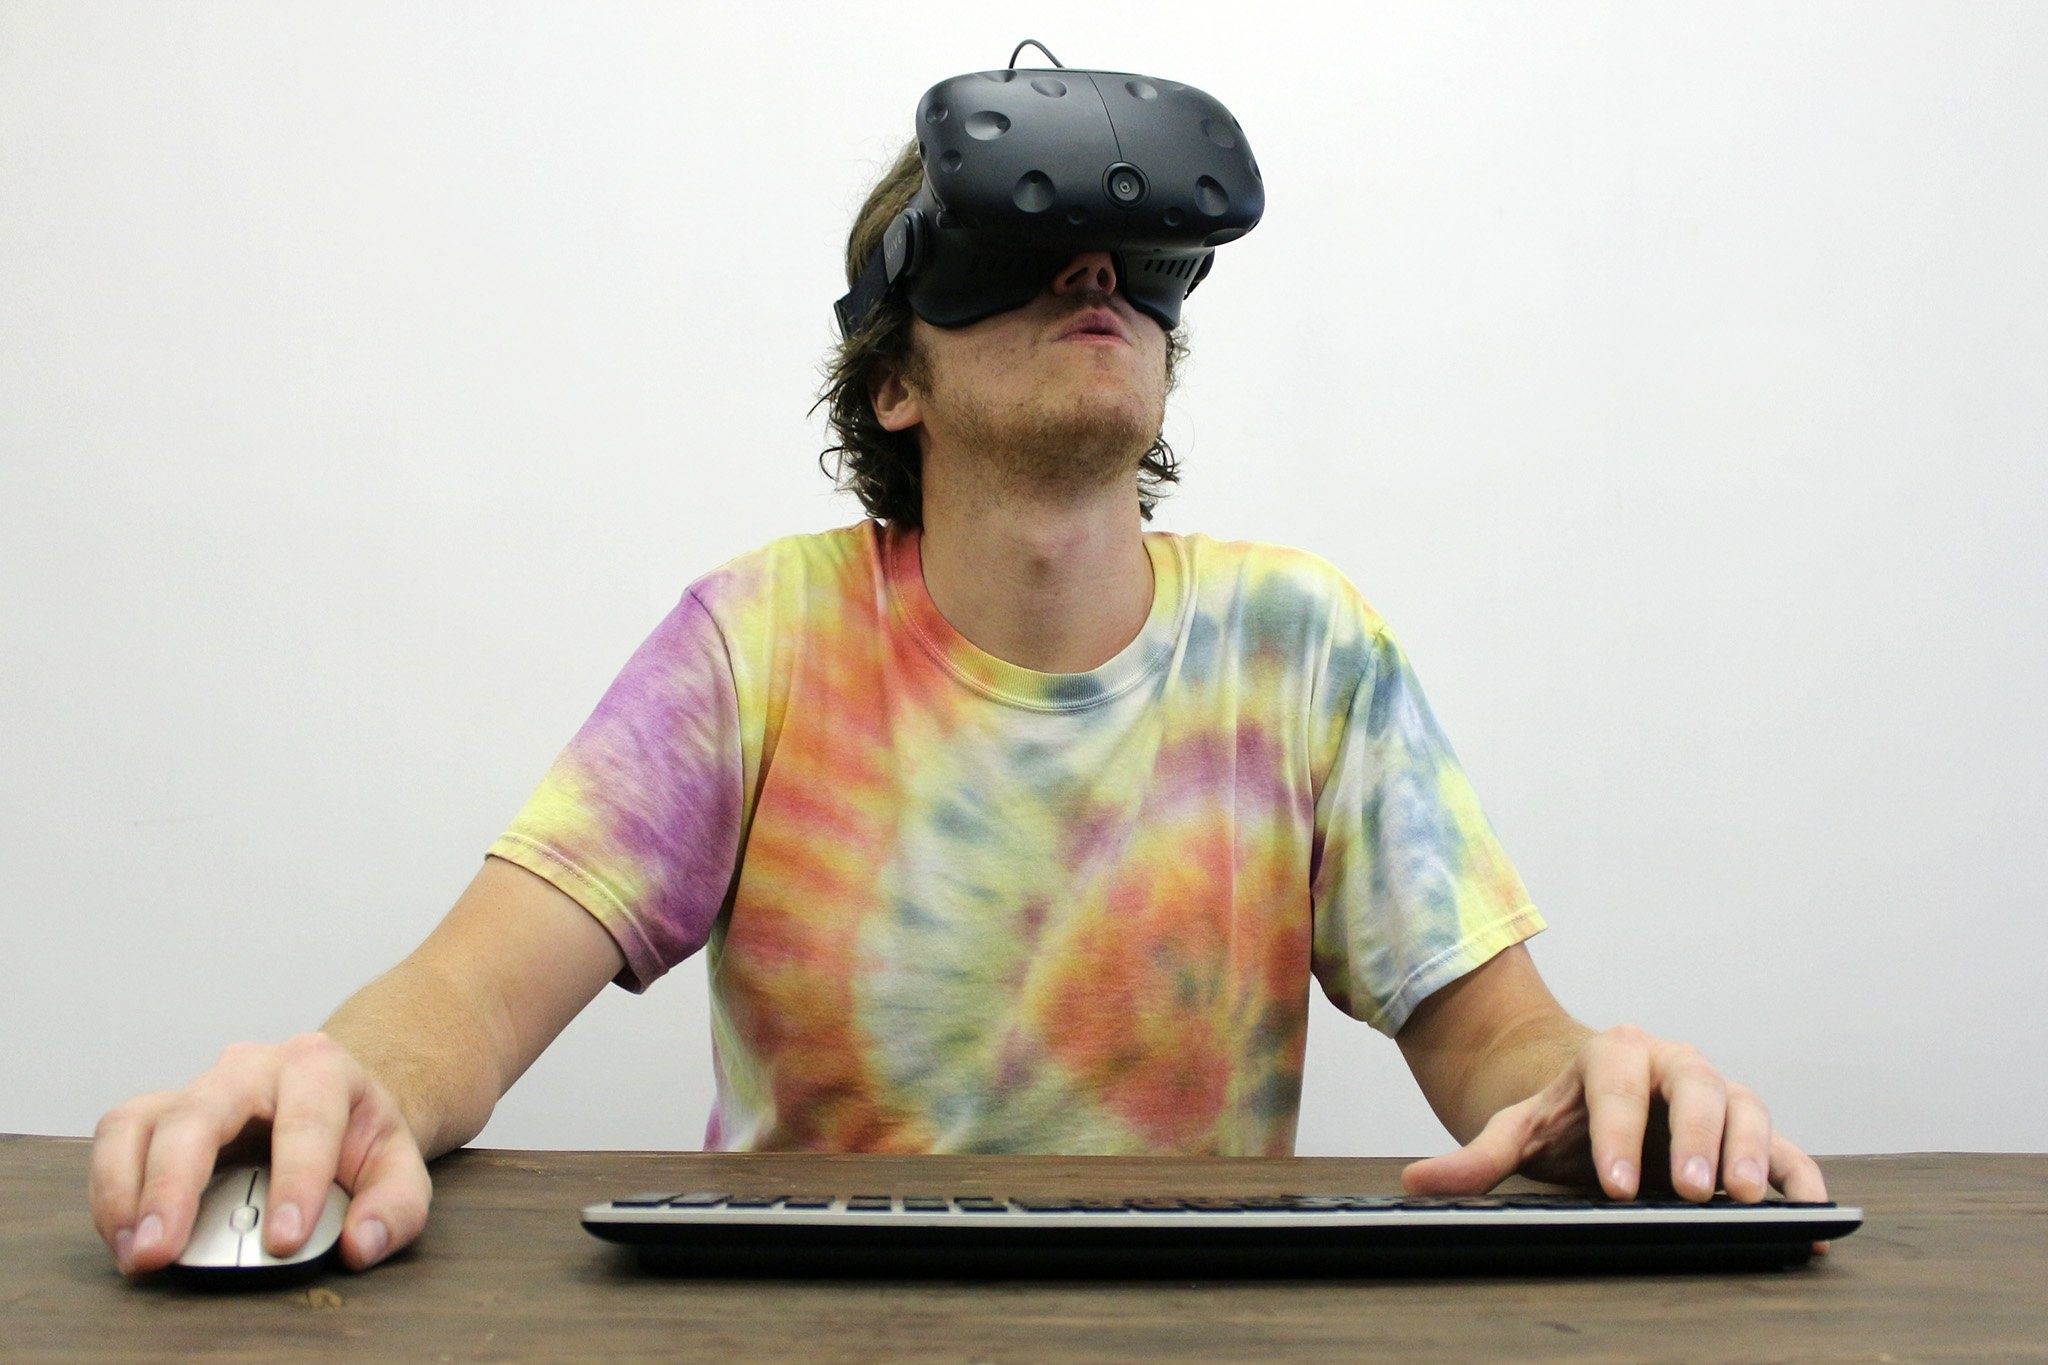 How To Use A Keyboard With Oculus Rift